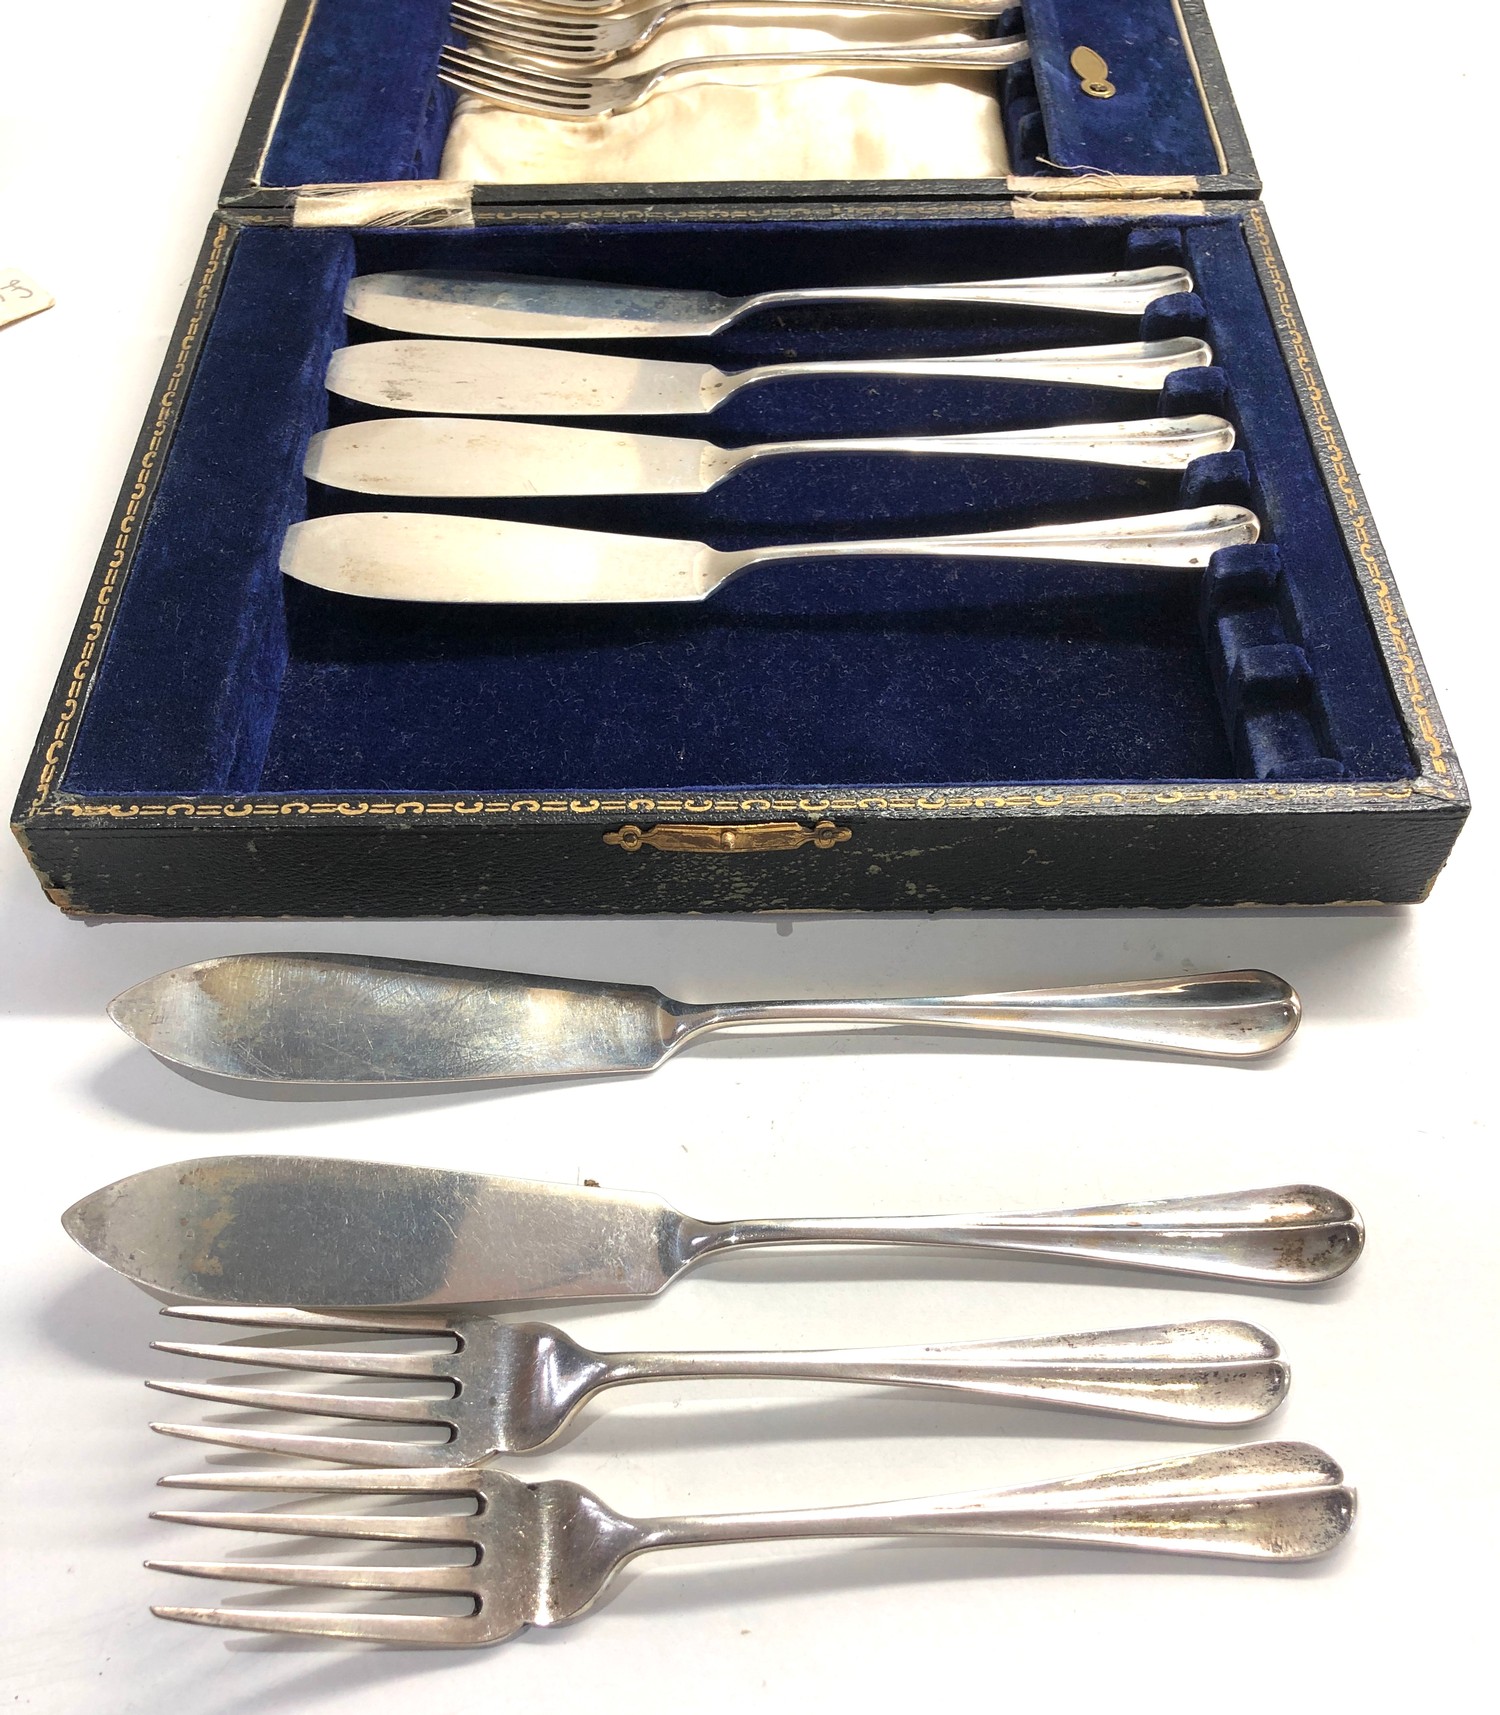 Boxed set of silver fish knives and forks weight 443g Sheffield silver hallmarks - Image 2 of 3